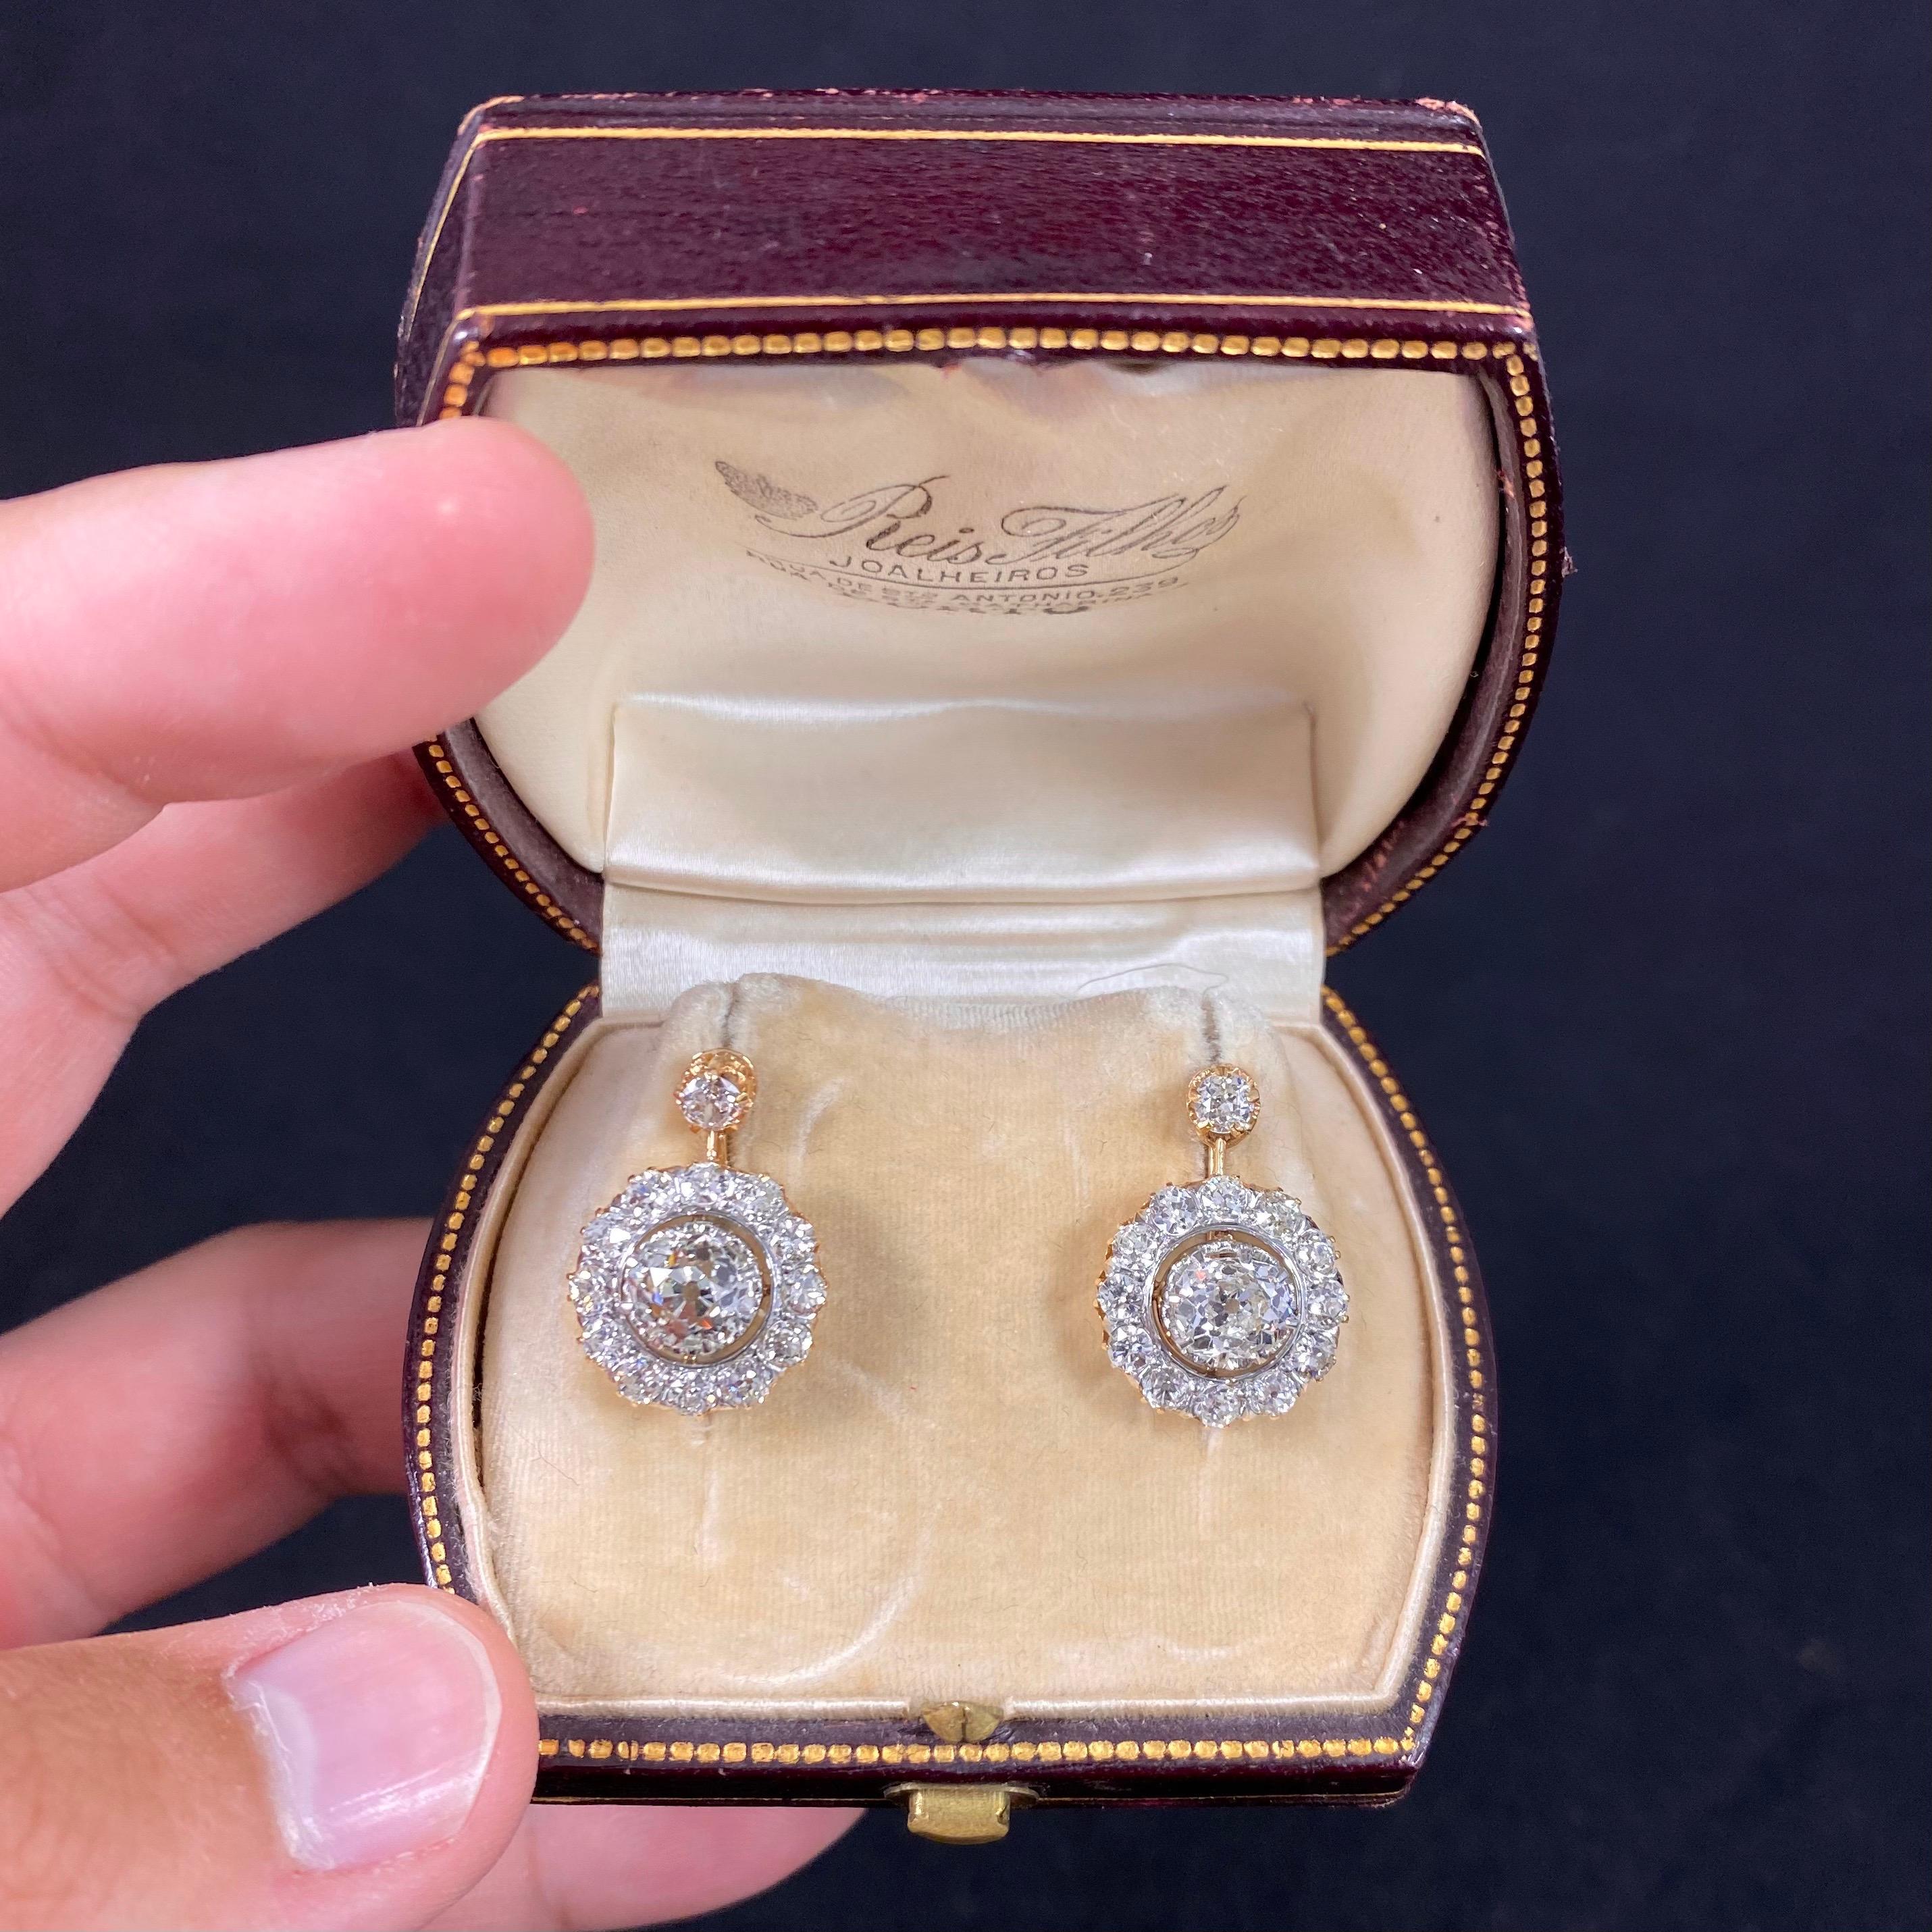 A pair of Art Deco 3.94 carat Old Mine-cut diamond target earrings in 19.2kt yellow gold and platinum, Portuguese, 1940s. Each earring features a large Old Mine-cut diamond claw-set to the centre, surrounded by a halo of similarly-set smaller